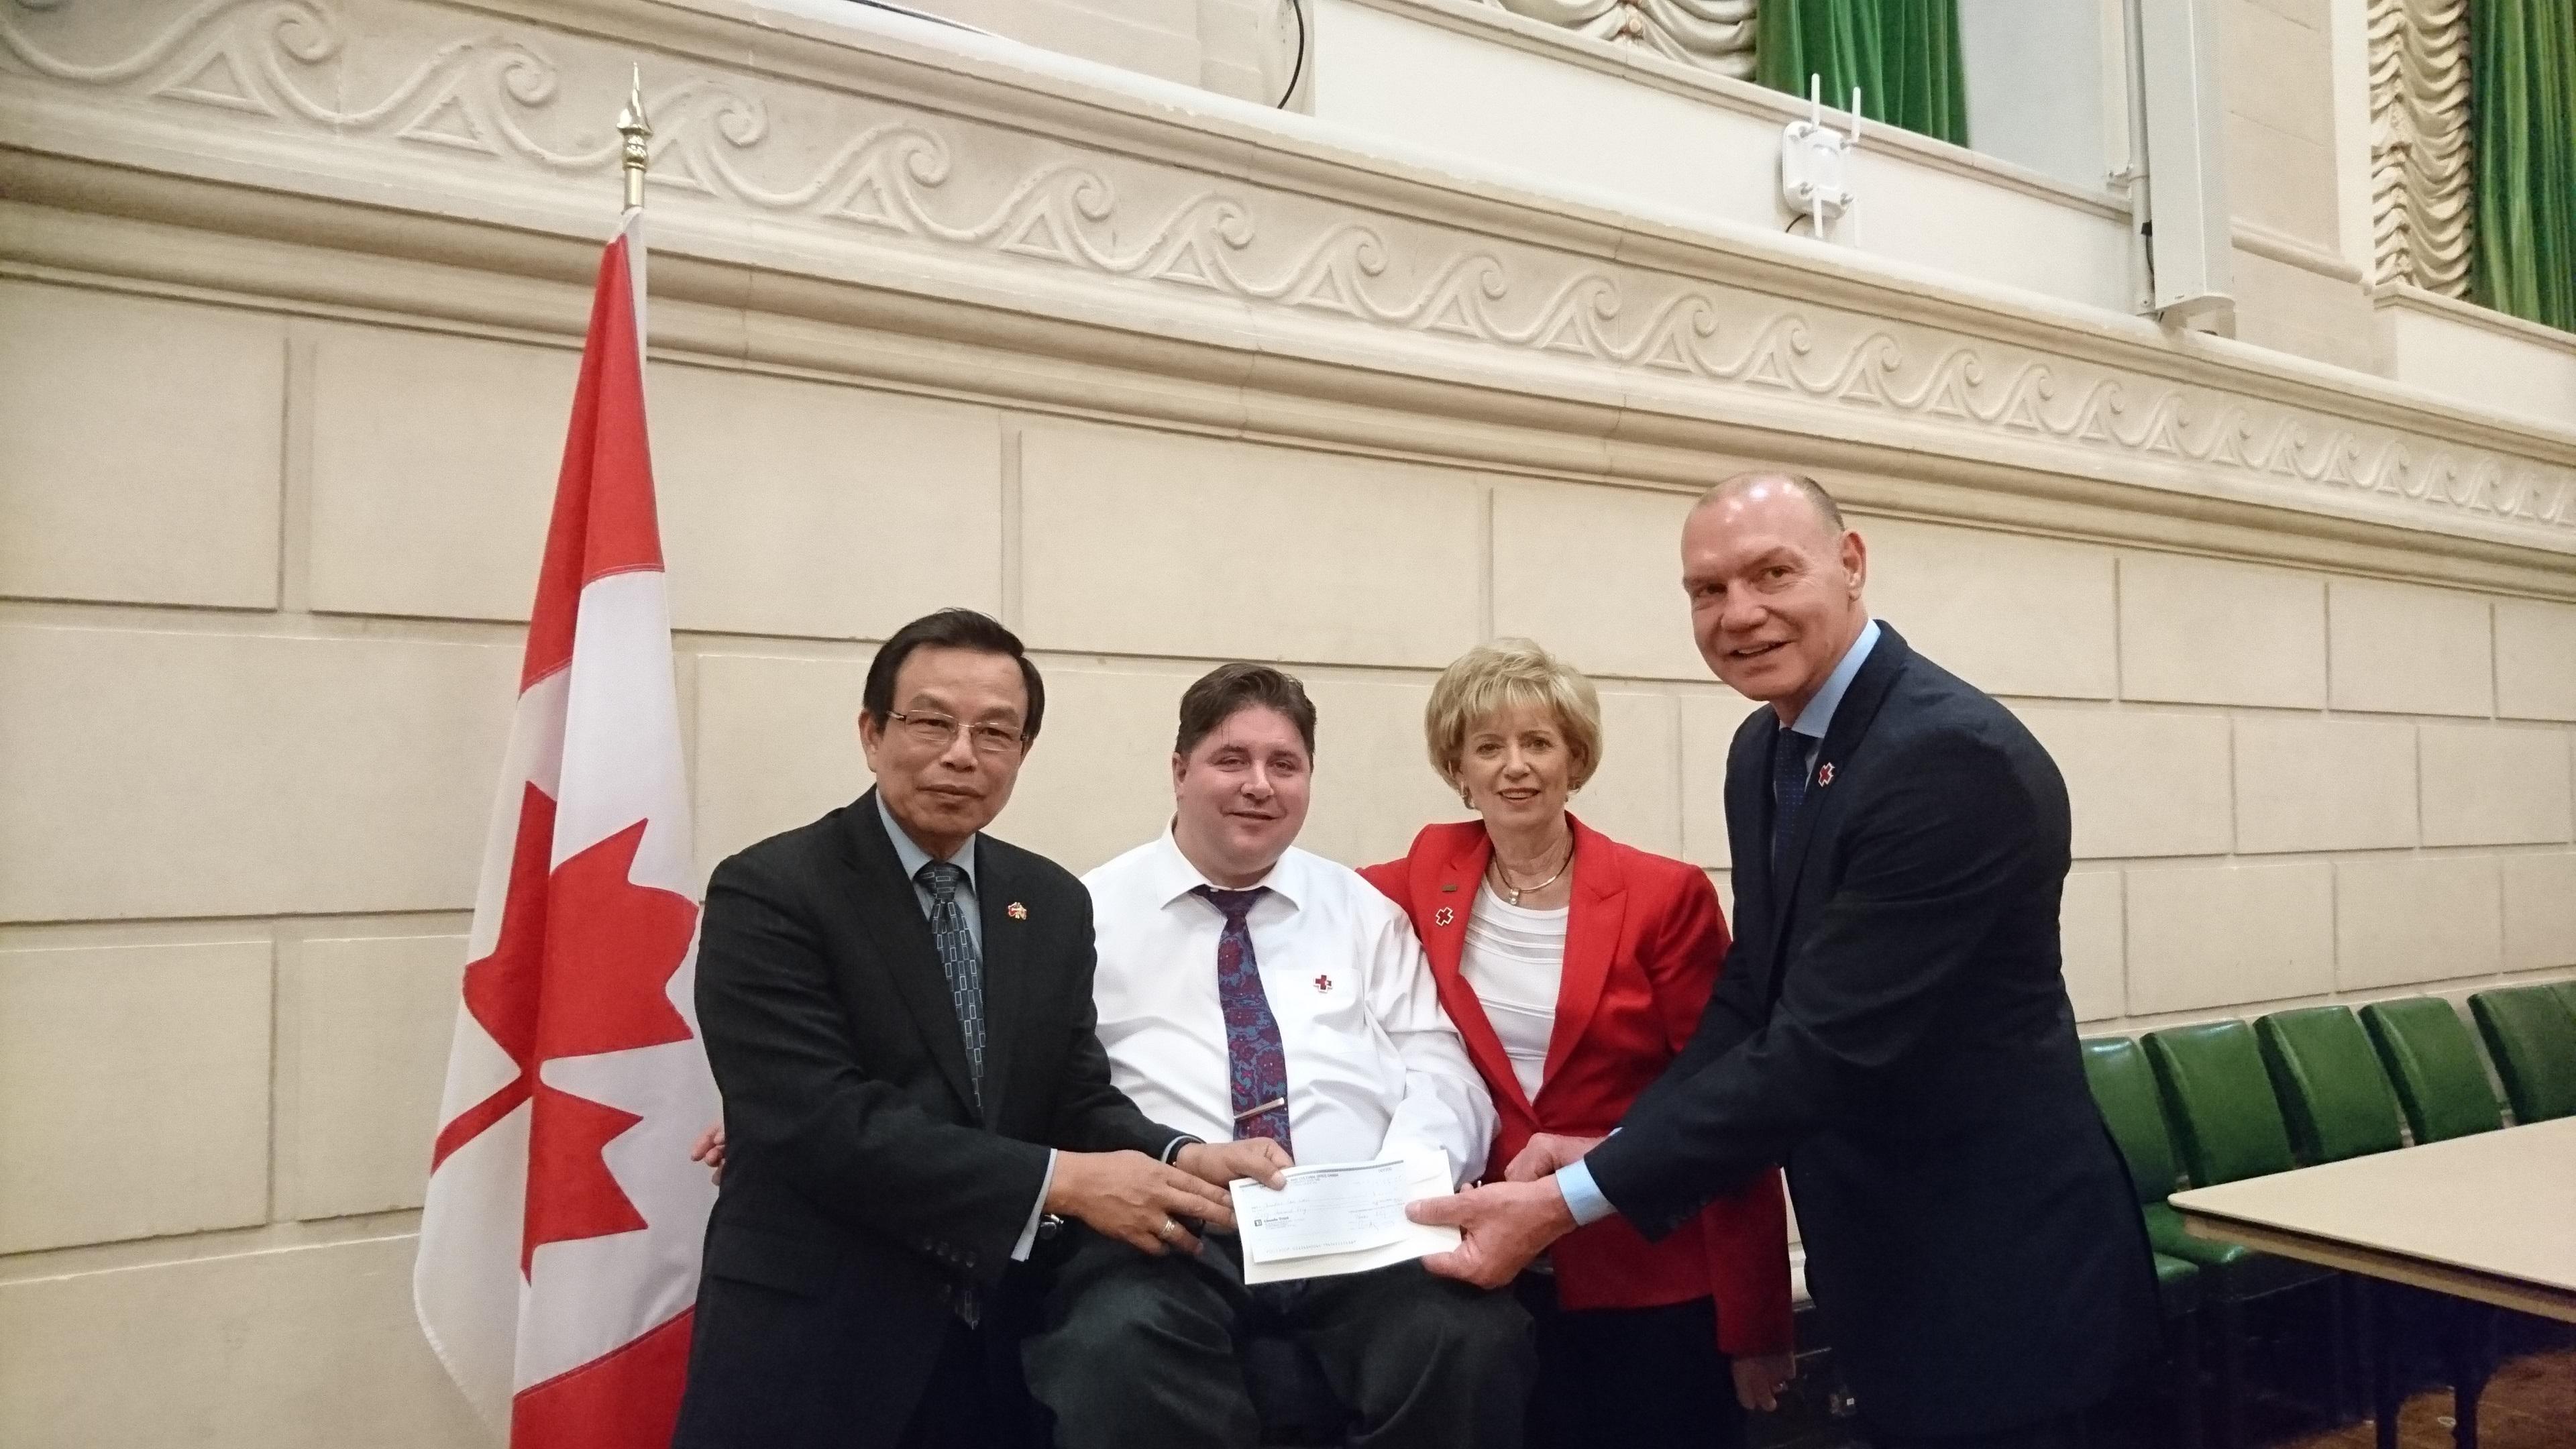 Left to Right: Rong-chuan Wu, Representative of the Taipei Economic and Cultural Office in Canada, the Honourable Kent Hehr, Alberta resident and Minister of Veteran Affairs for Canada, and the Honourable Member of Parliament Judy Sgro (the Chair of Canada-Taiwan Parliamentary Friendship Group)